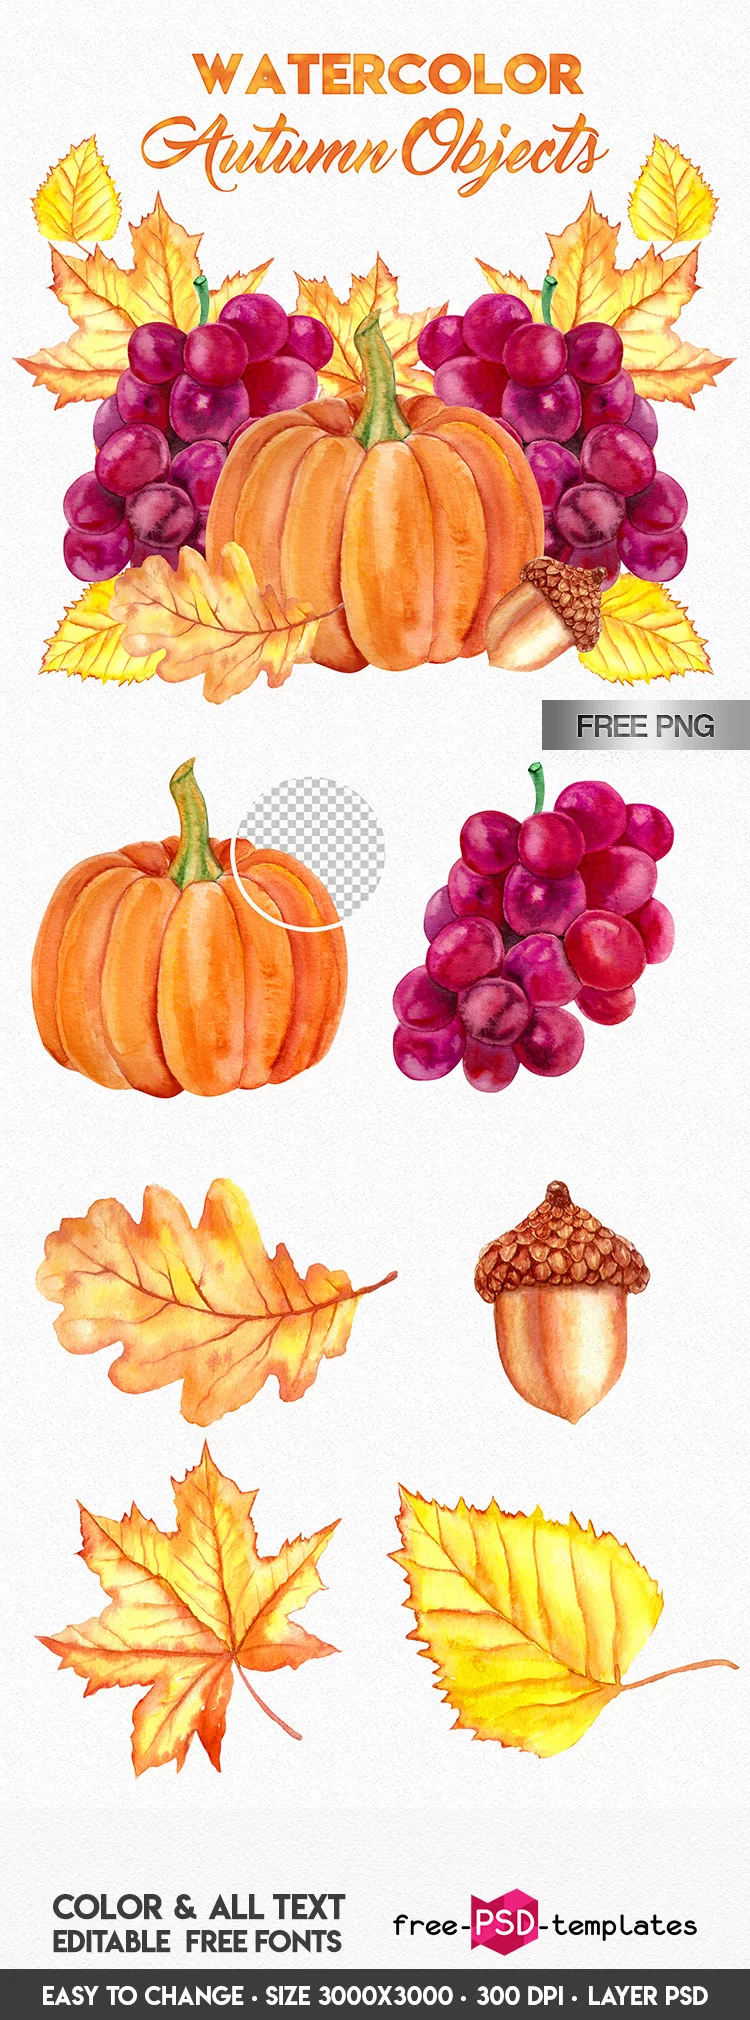 FREE Watercolor Autumn Objects